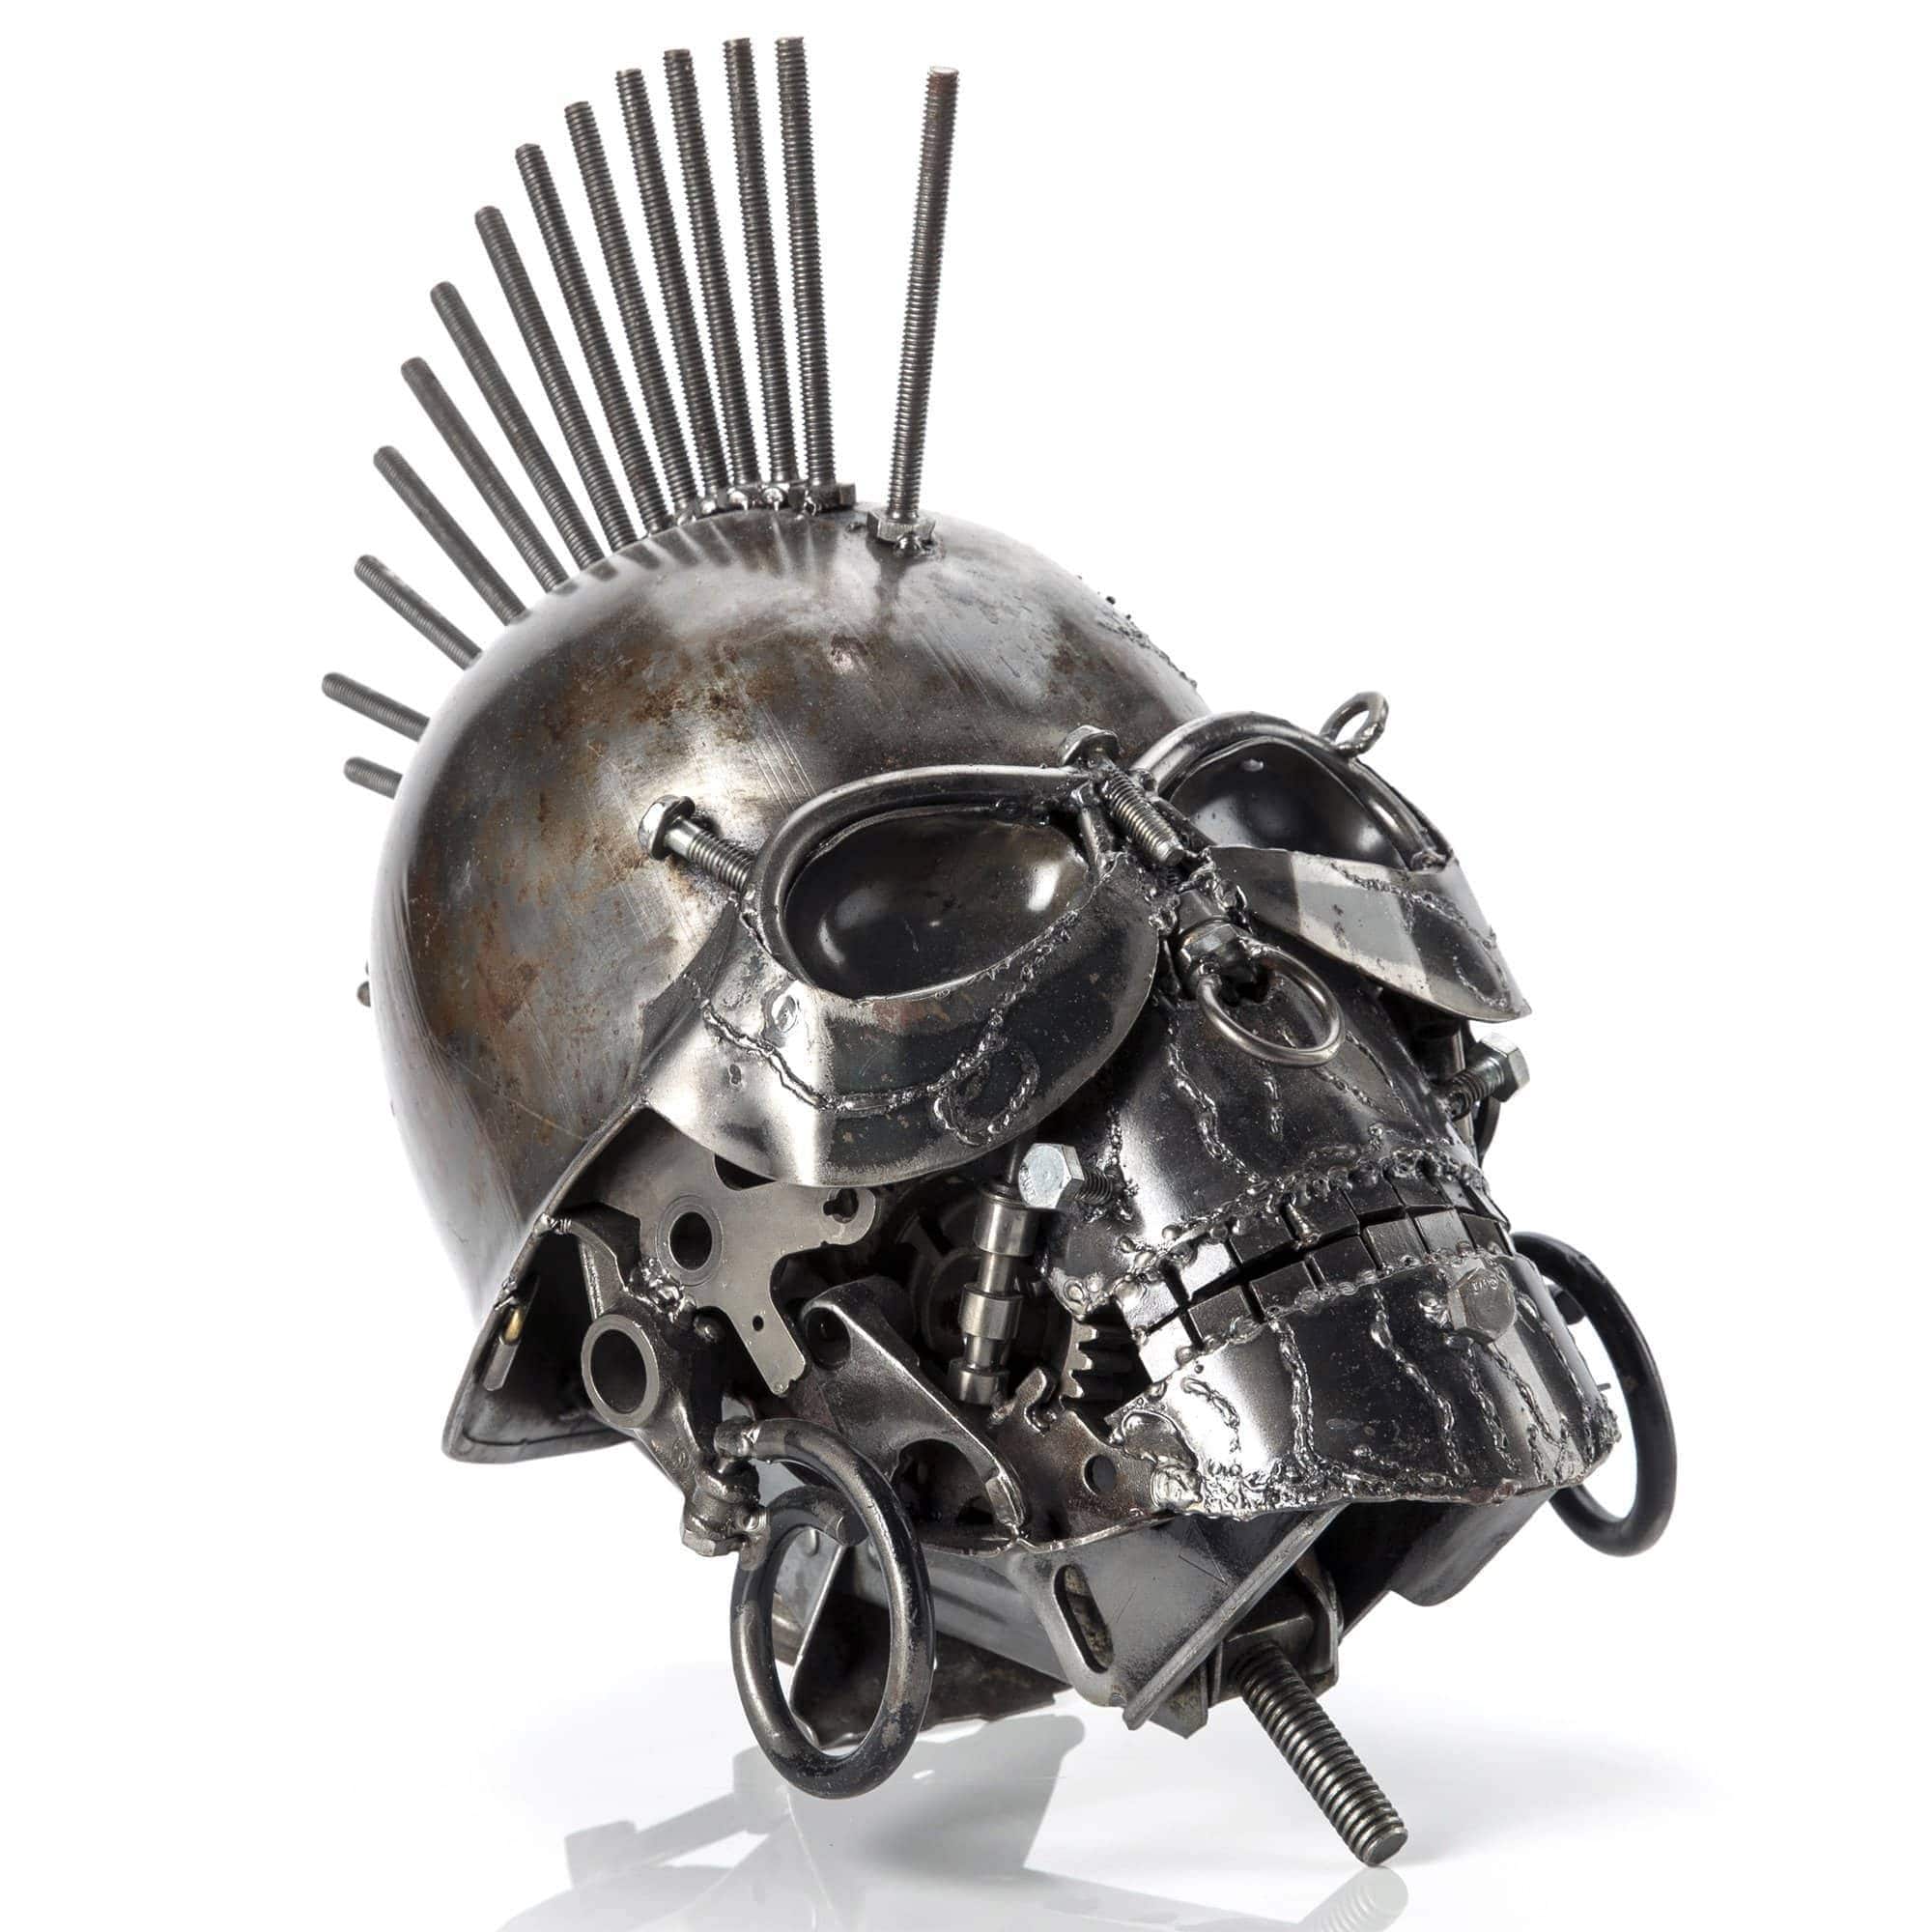 Kalifano Recycled Metal Art Skull Inspired Recycled Metal Sculpture RMS-SK43x25-S